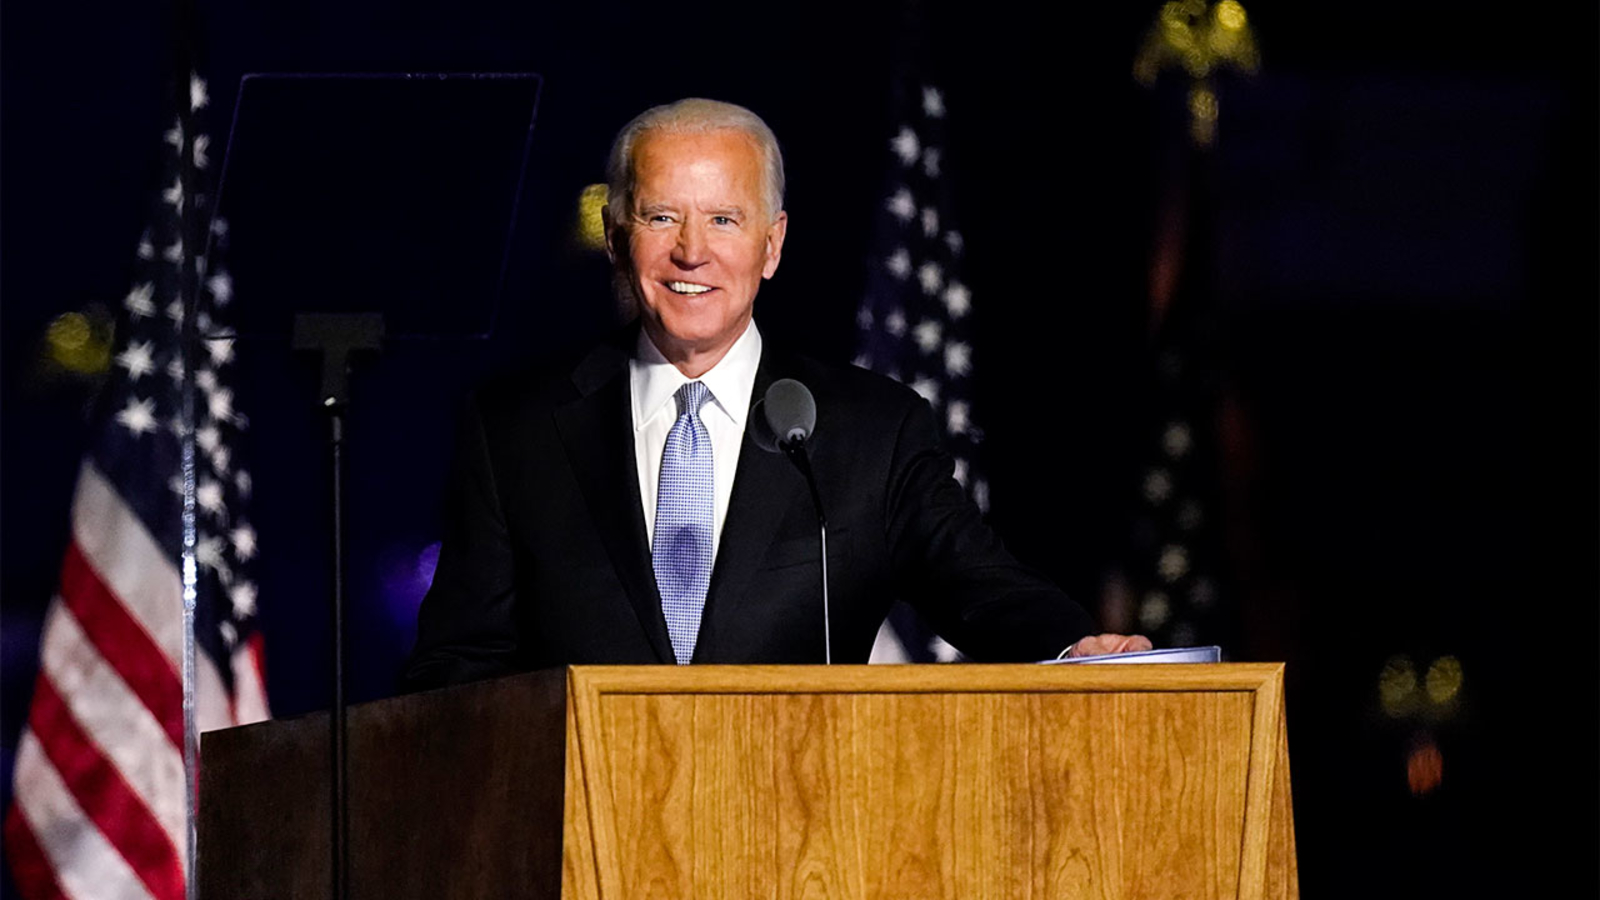 NATO is closer, more united than ever before: Biden